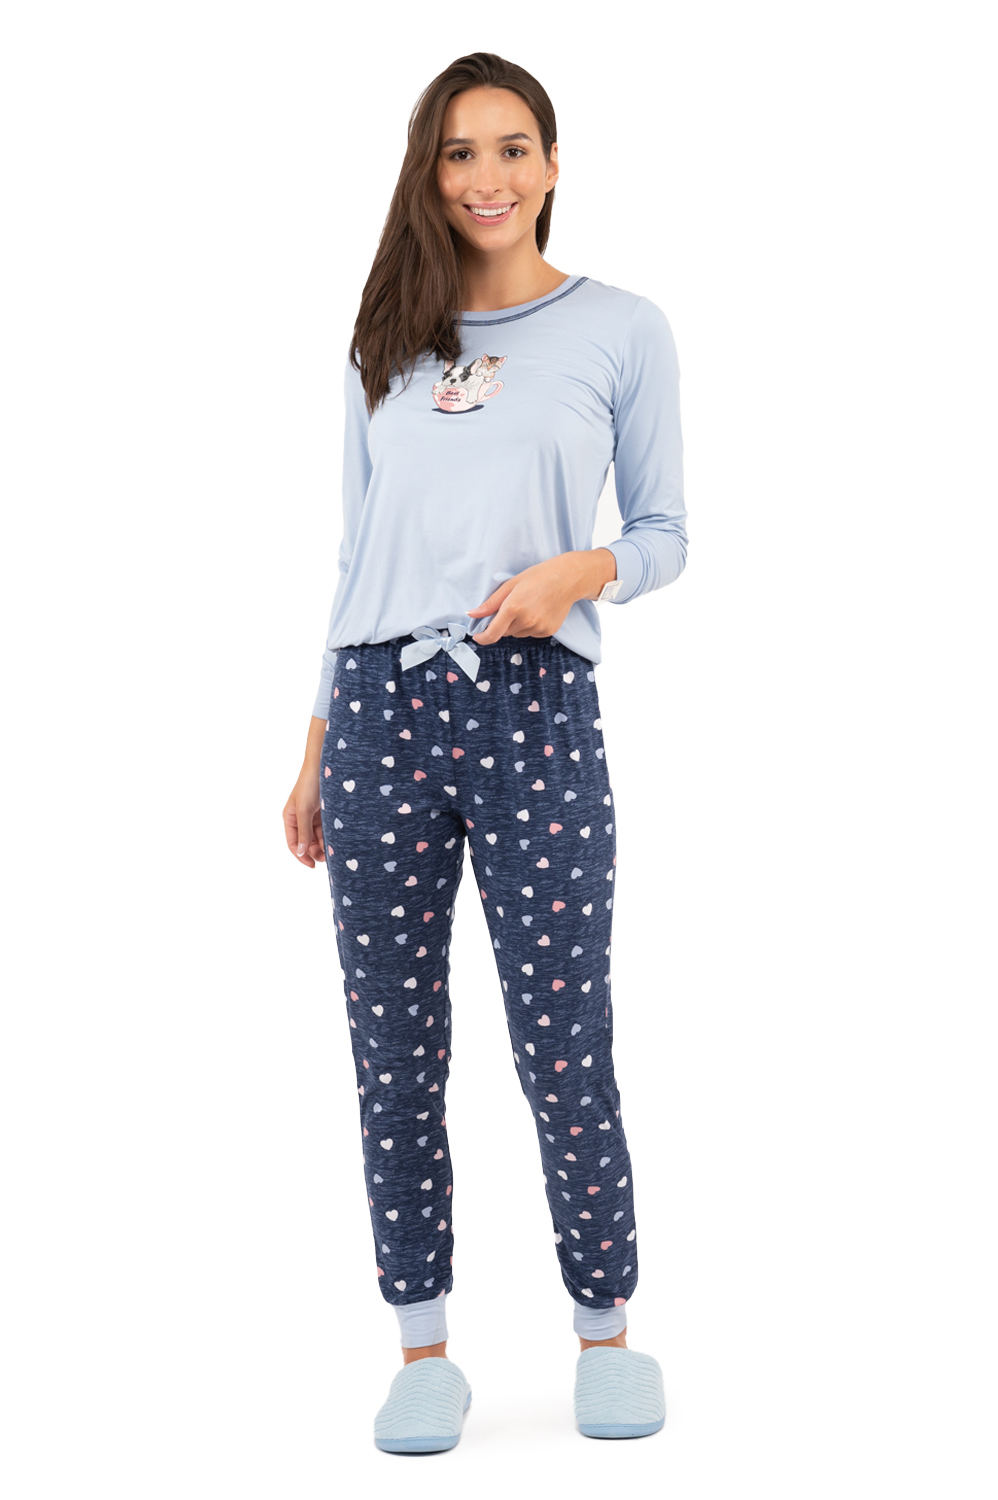 Blue Hearts long sleeve PJ set with silkscreen pets in teacup, large (L)